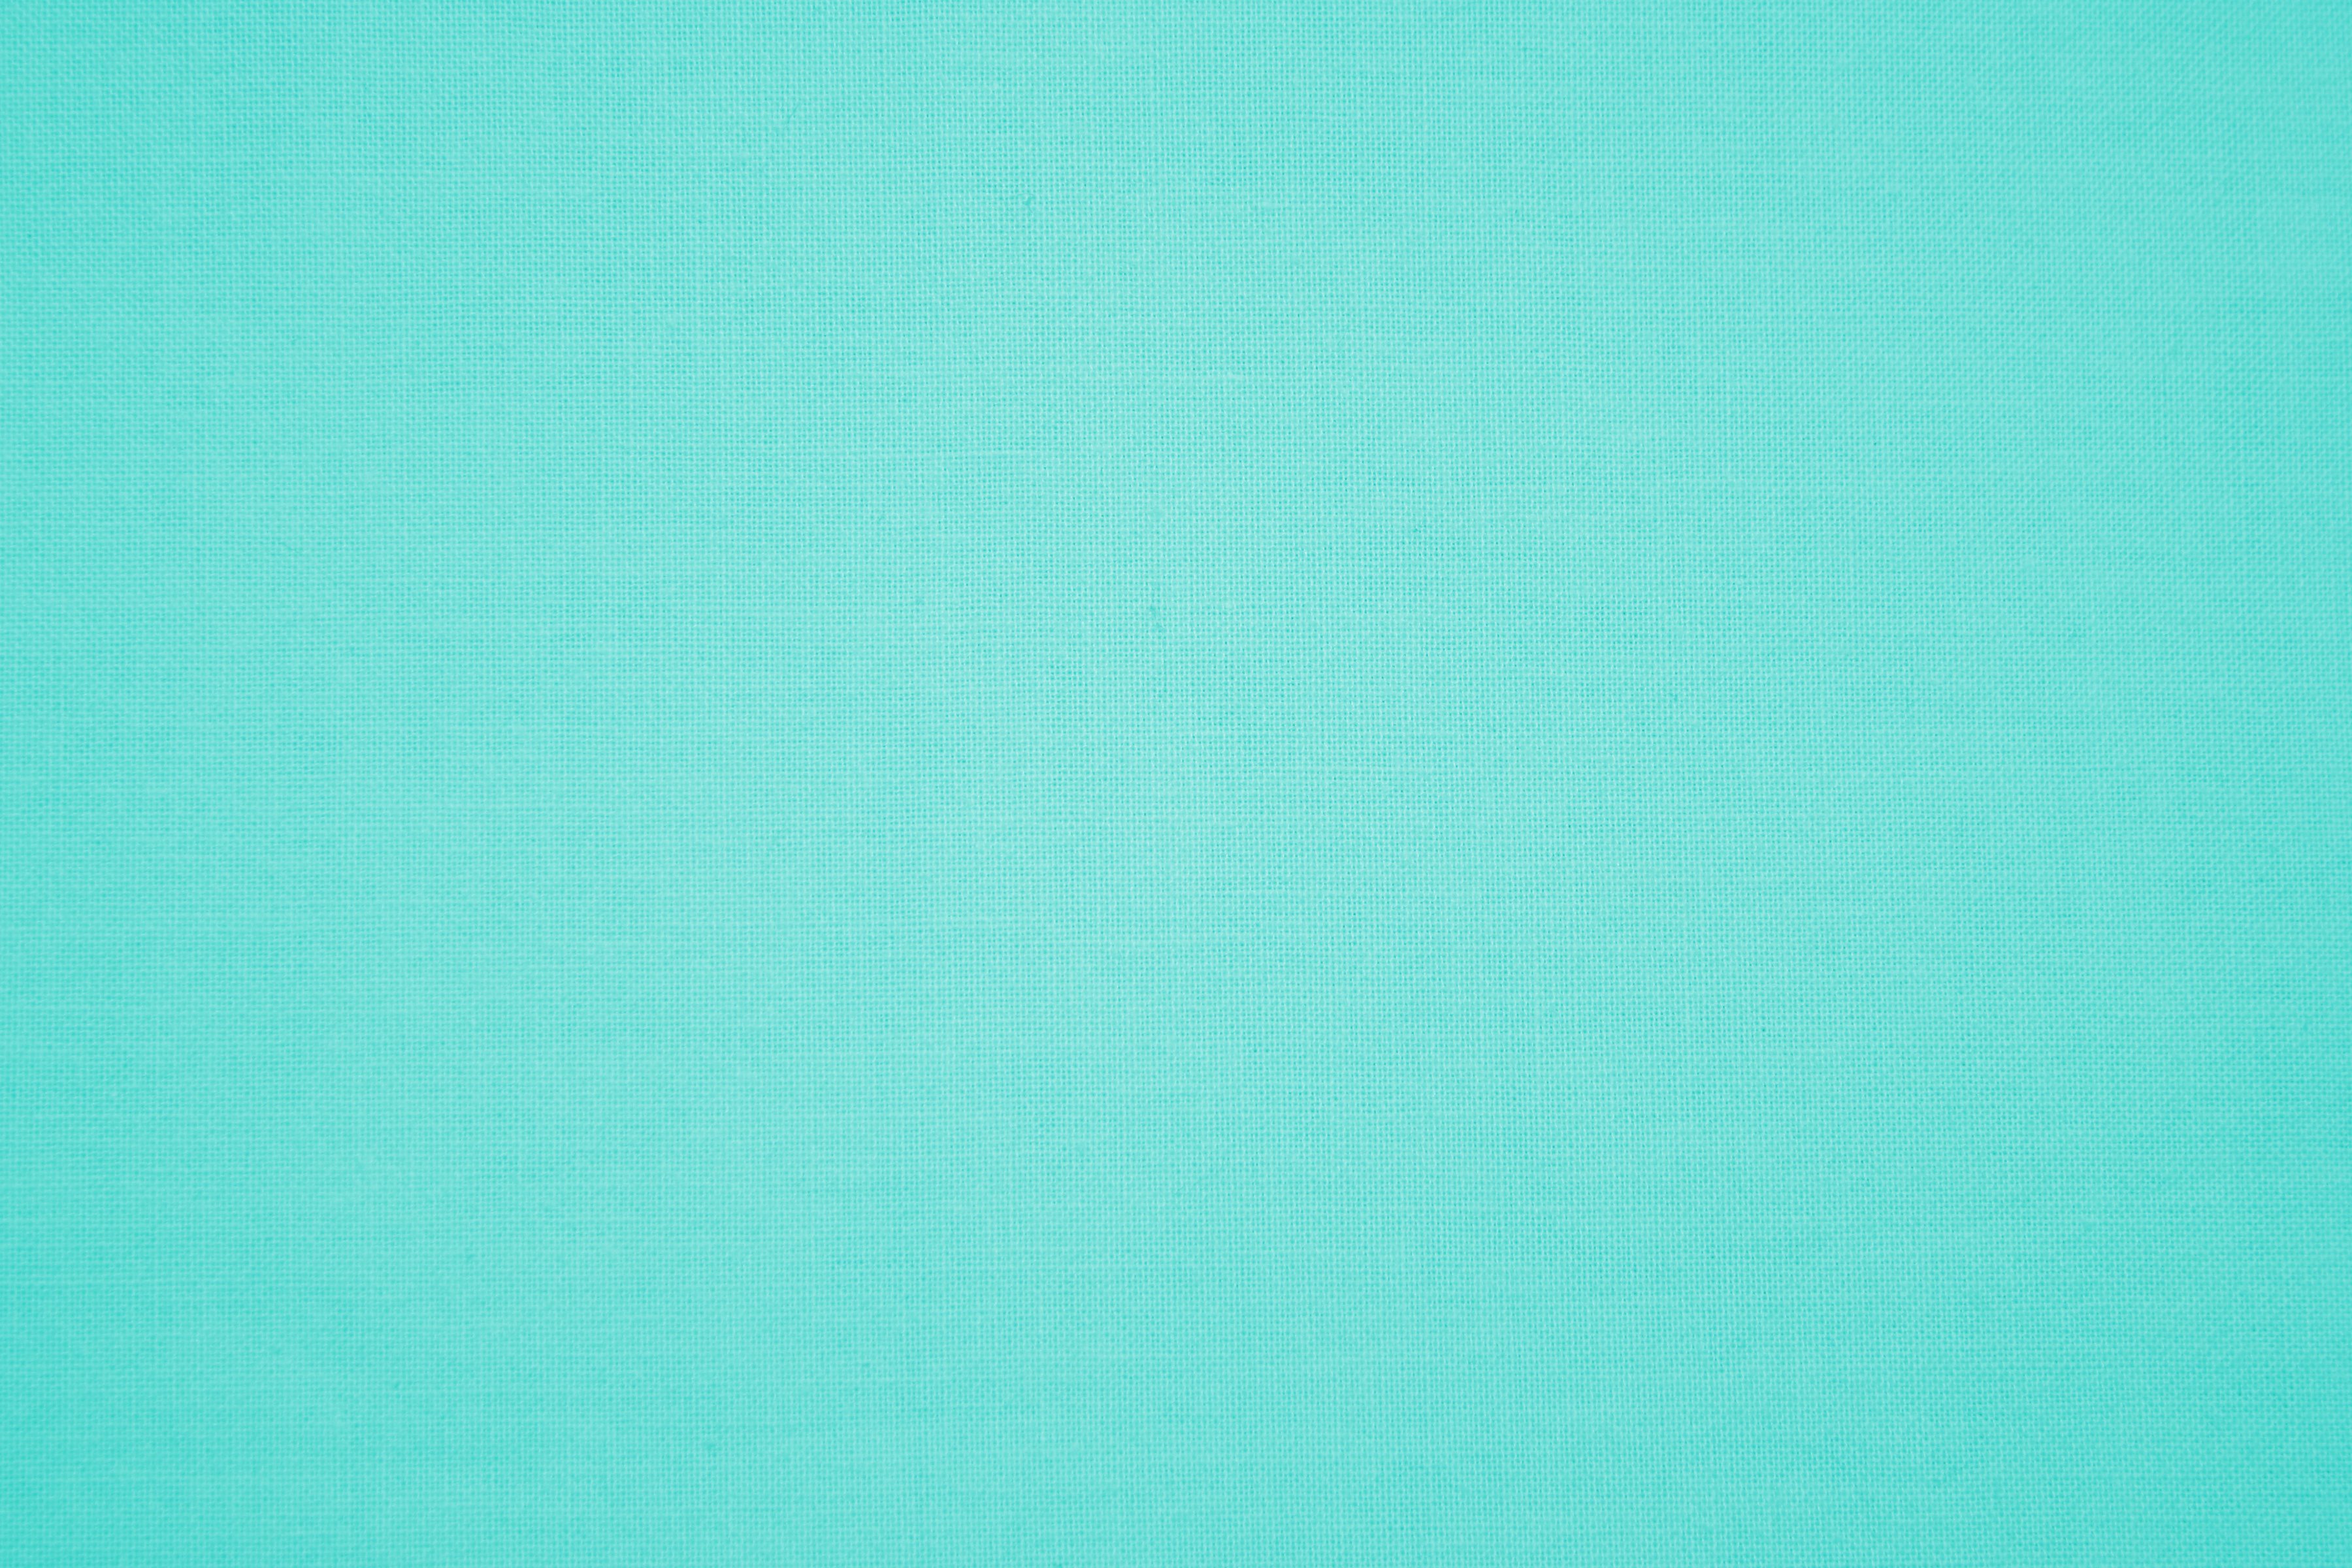 Turquoise Colored S Fabric Texture High Resolution Photo